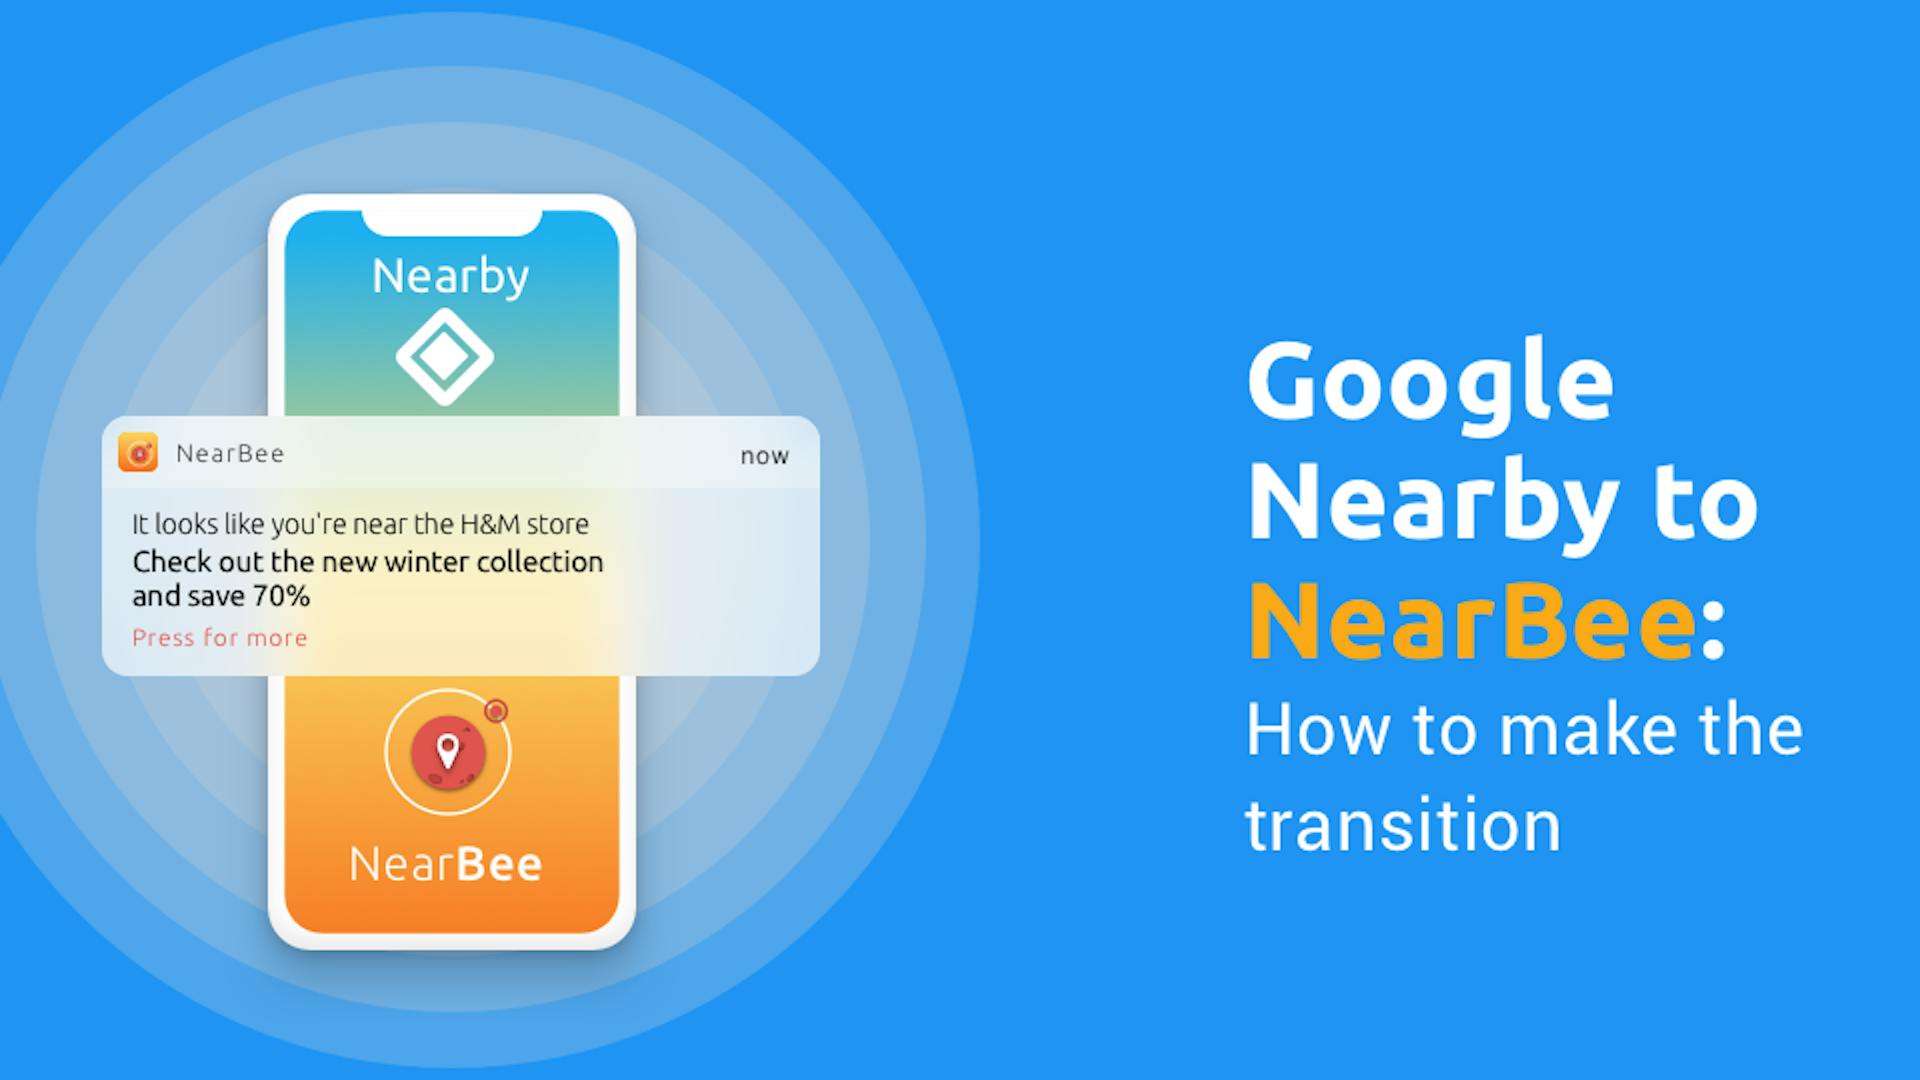 featured image - Nearby to NearBee: Here’s how you can make the transition